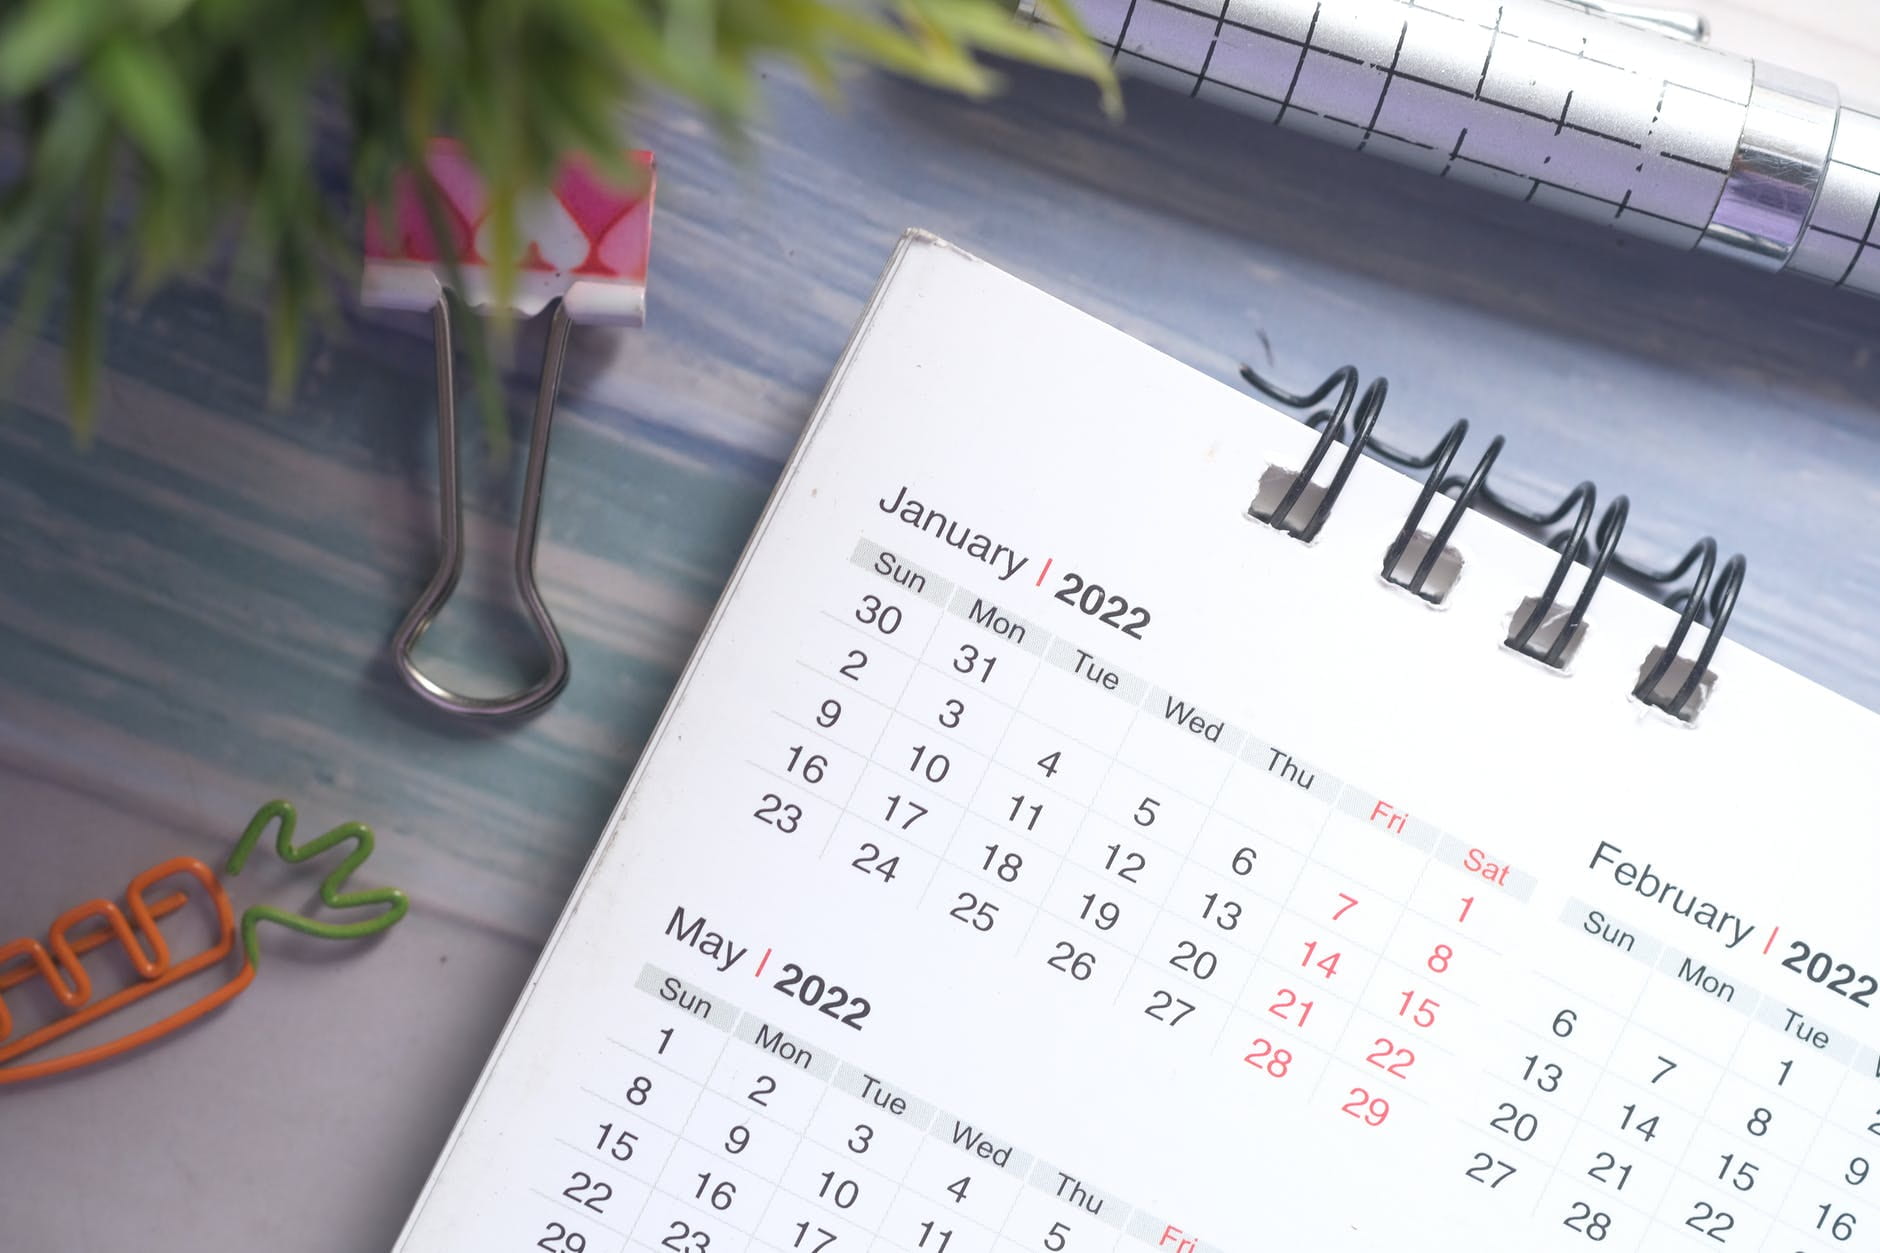 The top left corner of a spiral calendar is shown, displaying January 2022 and parts of February and May 2022. Several clips are around the notebook. 